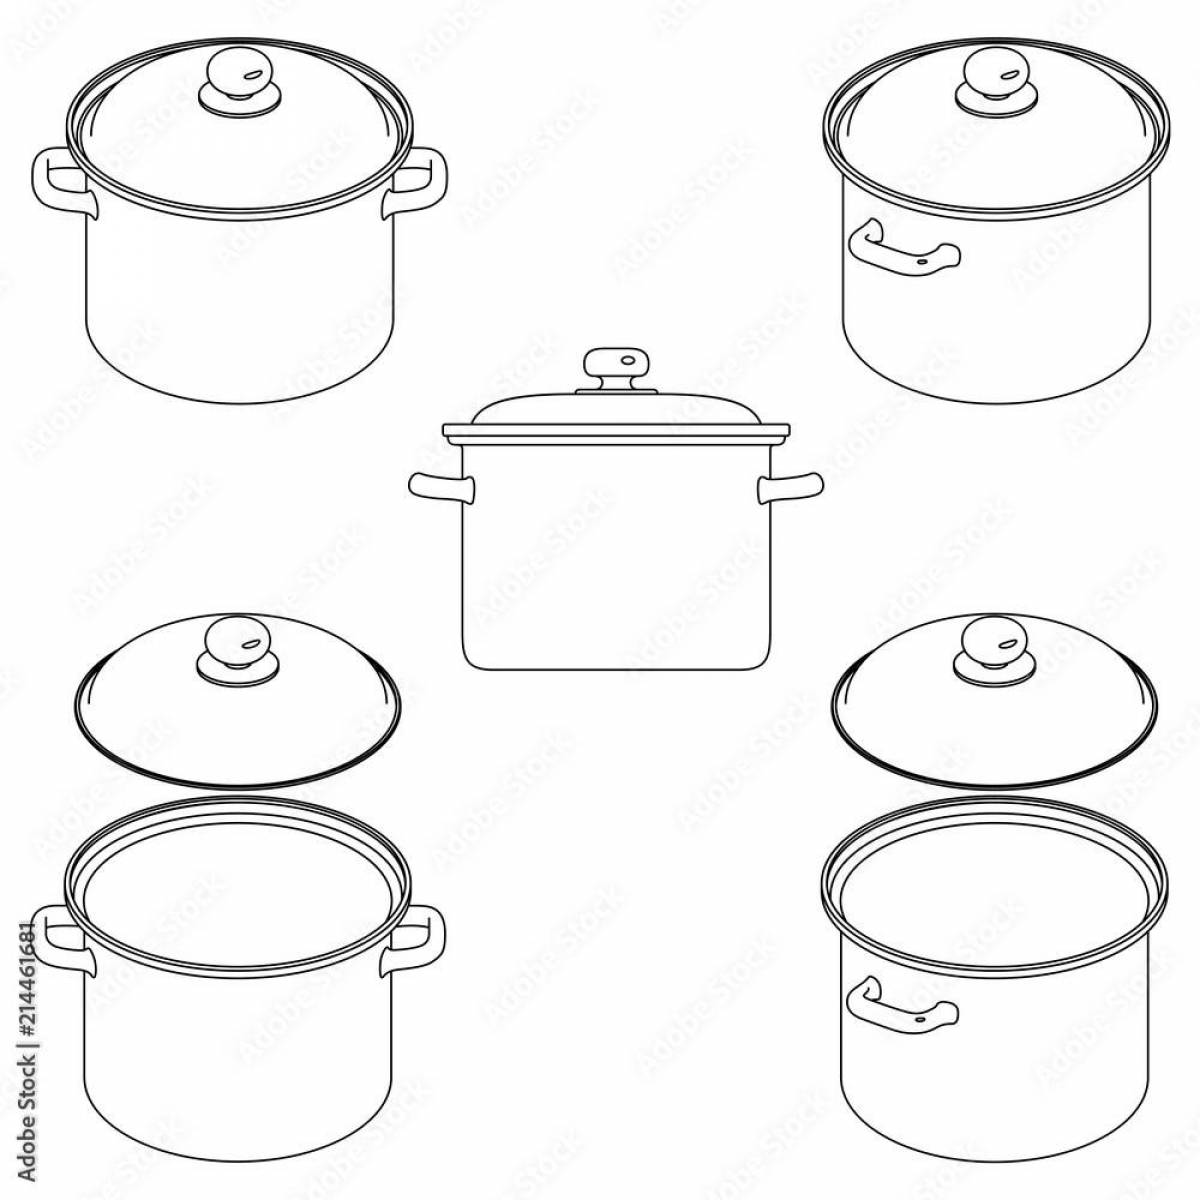 Living pan coloring page for kids